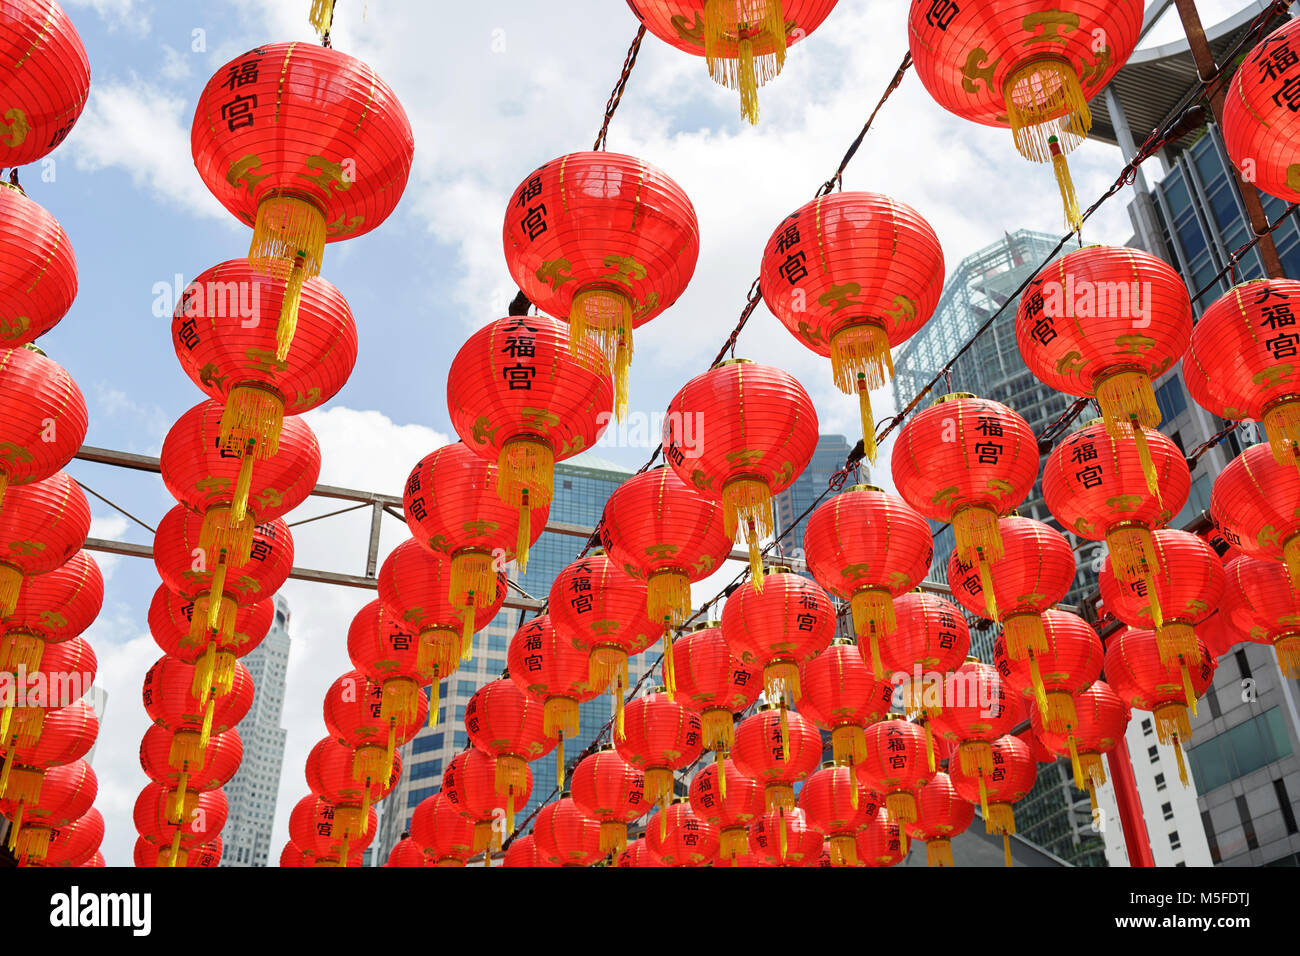 Traditional red lanterns during Chinese New Year in Chinatown, Singapore Stock Photo